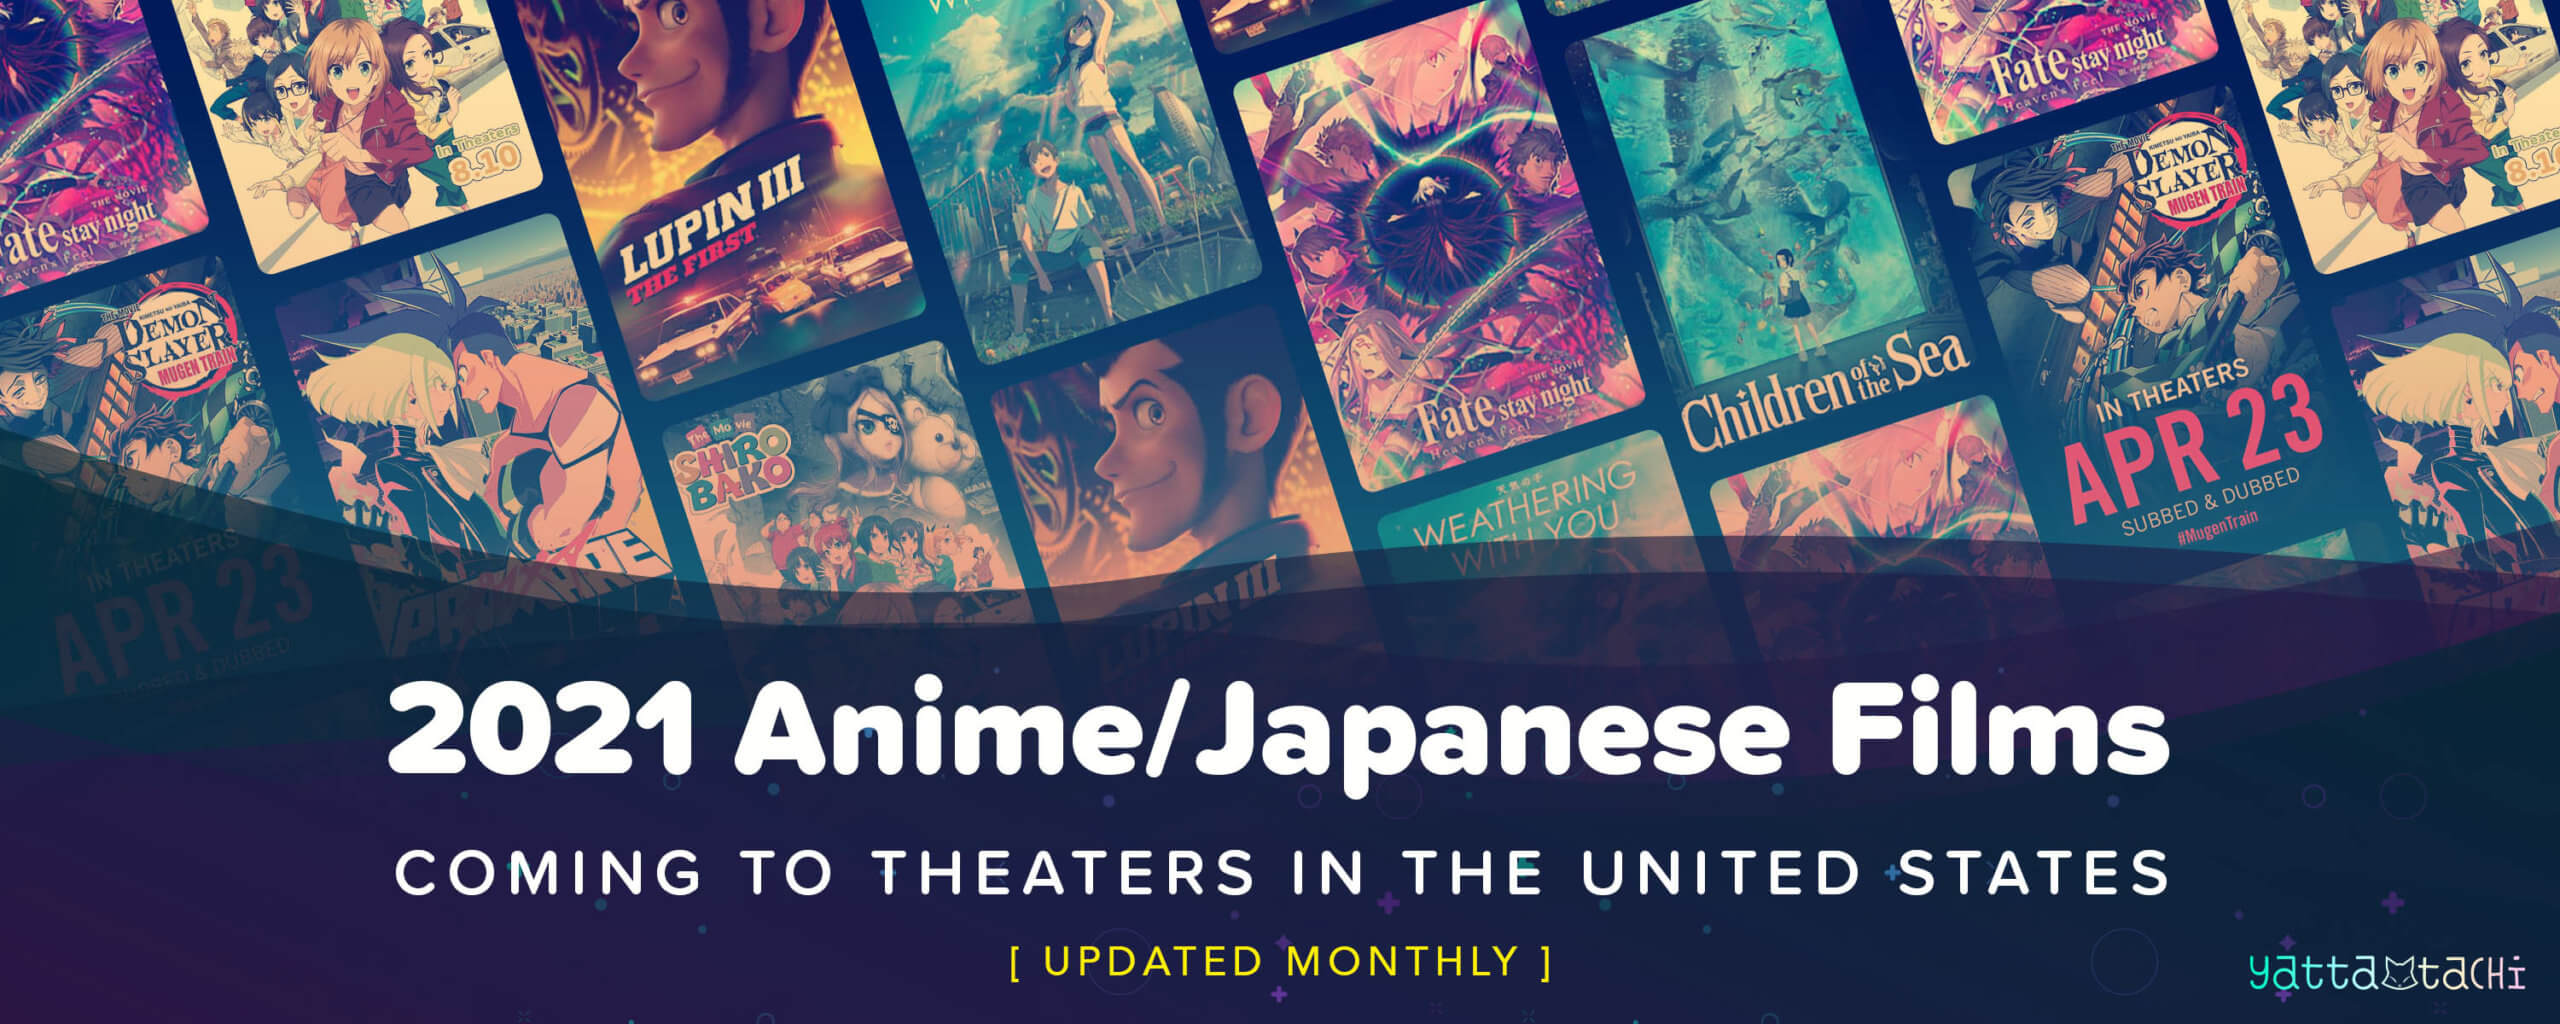 2021 Anime Japanese Films Coming To Us Theaters Yatta-tachi